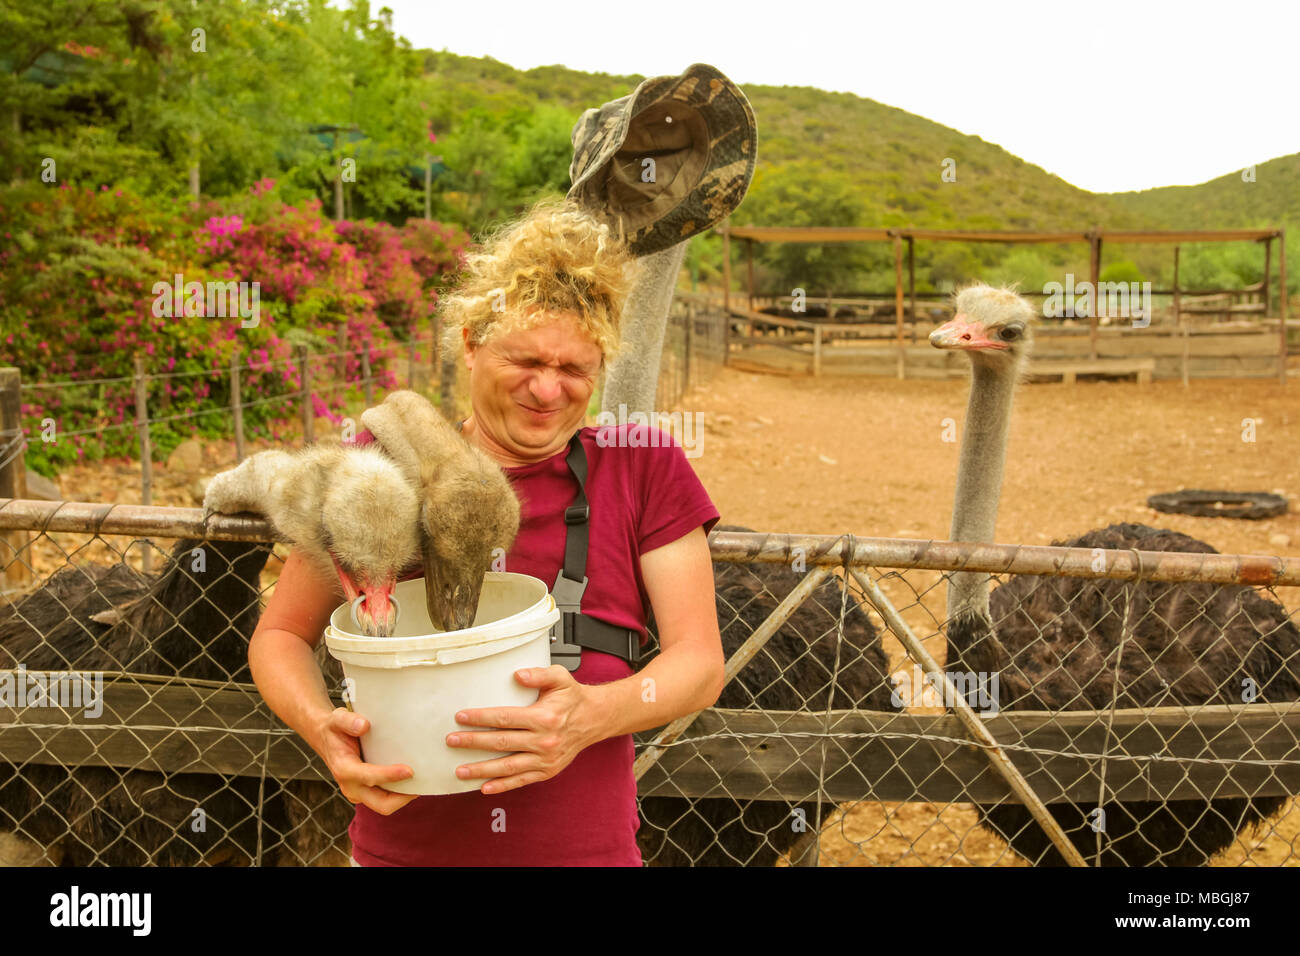 Tourist man feeds ostriches in Oudtshoorn, Western Cape, South Africa while an ostrich steals his hat. Fun tourist activity in the largest city of Little Karoo known for the numerous ostrich farms. Stock Photo